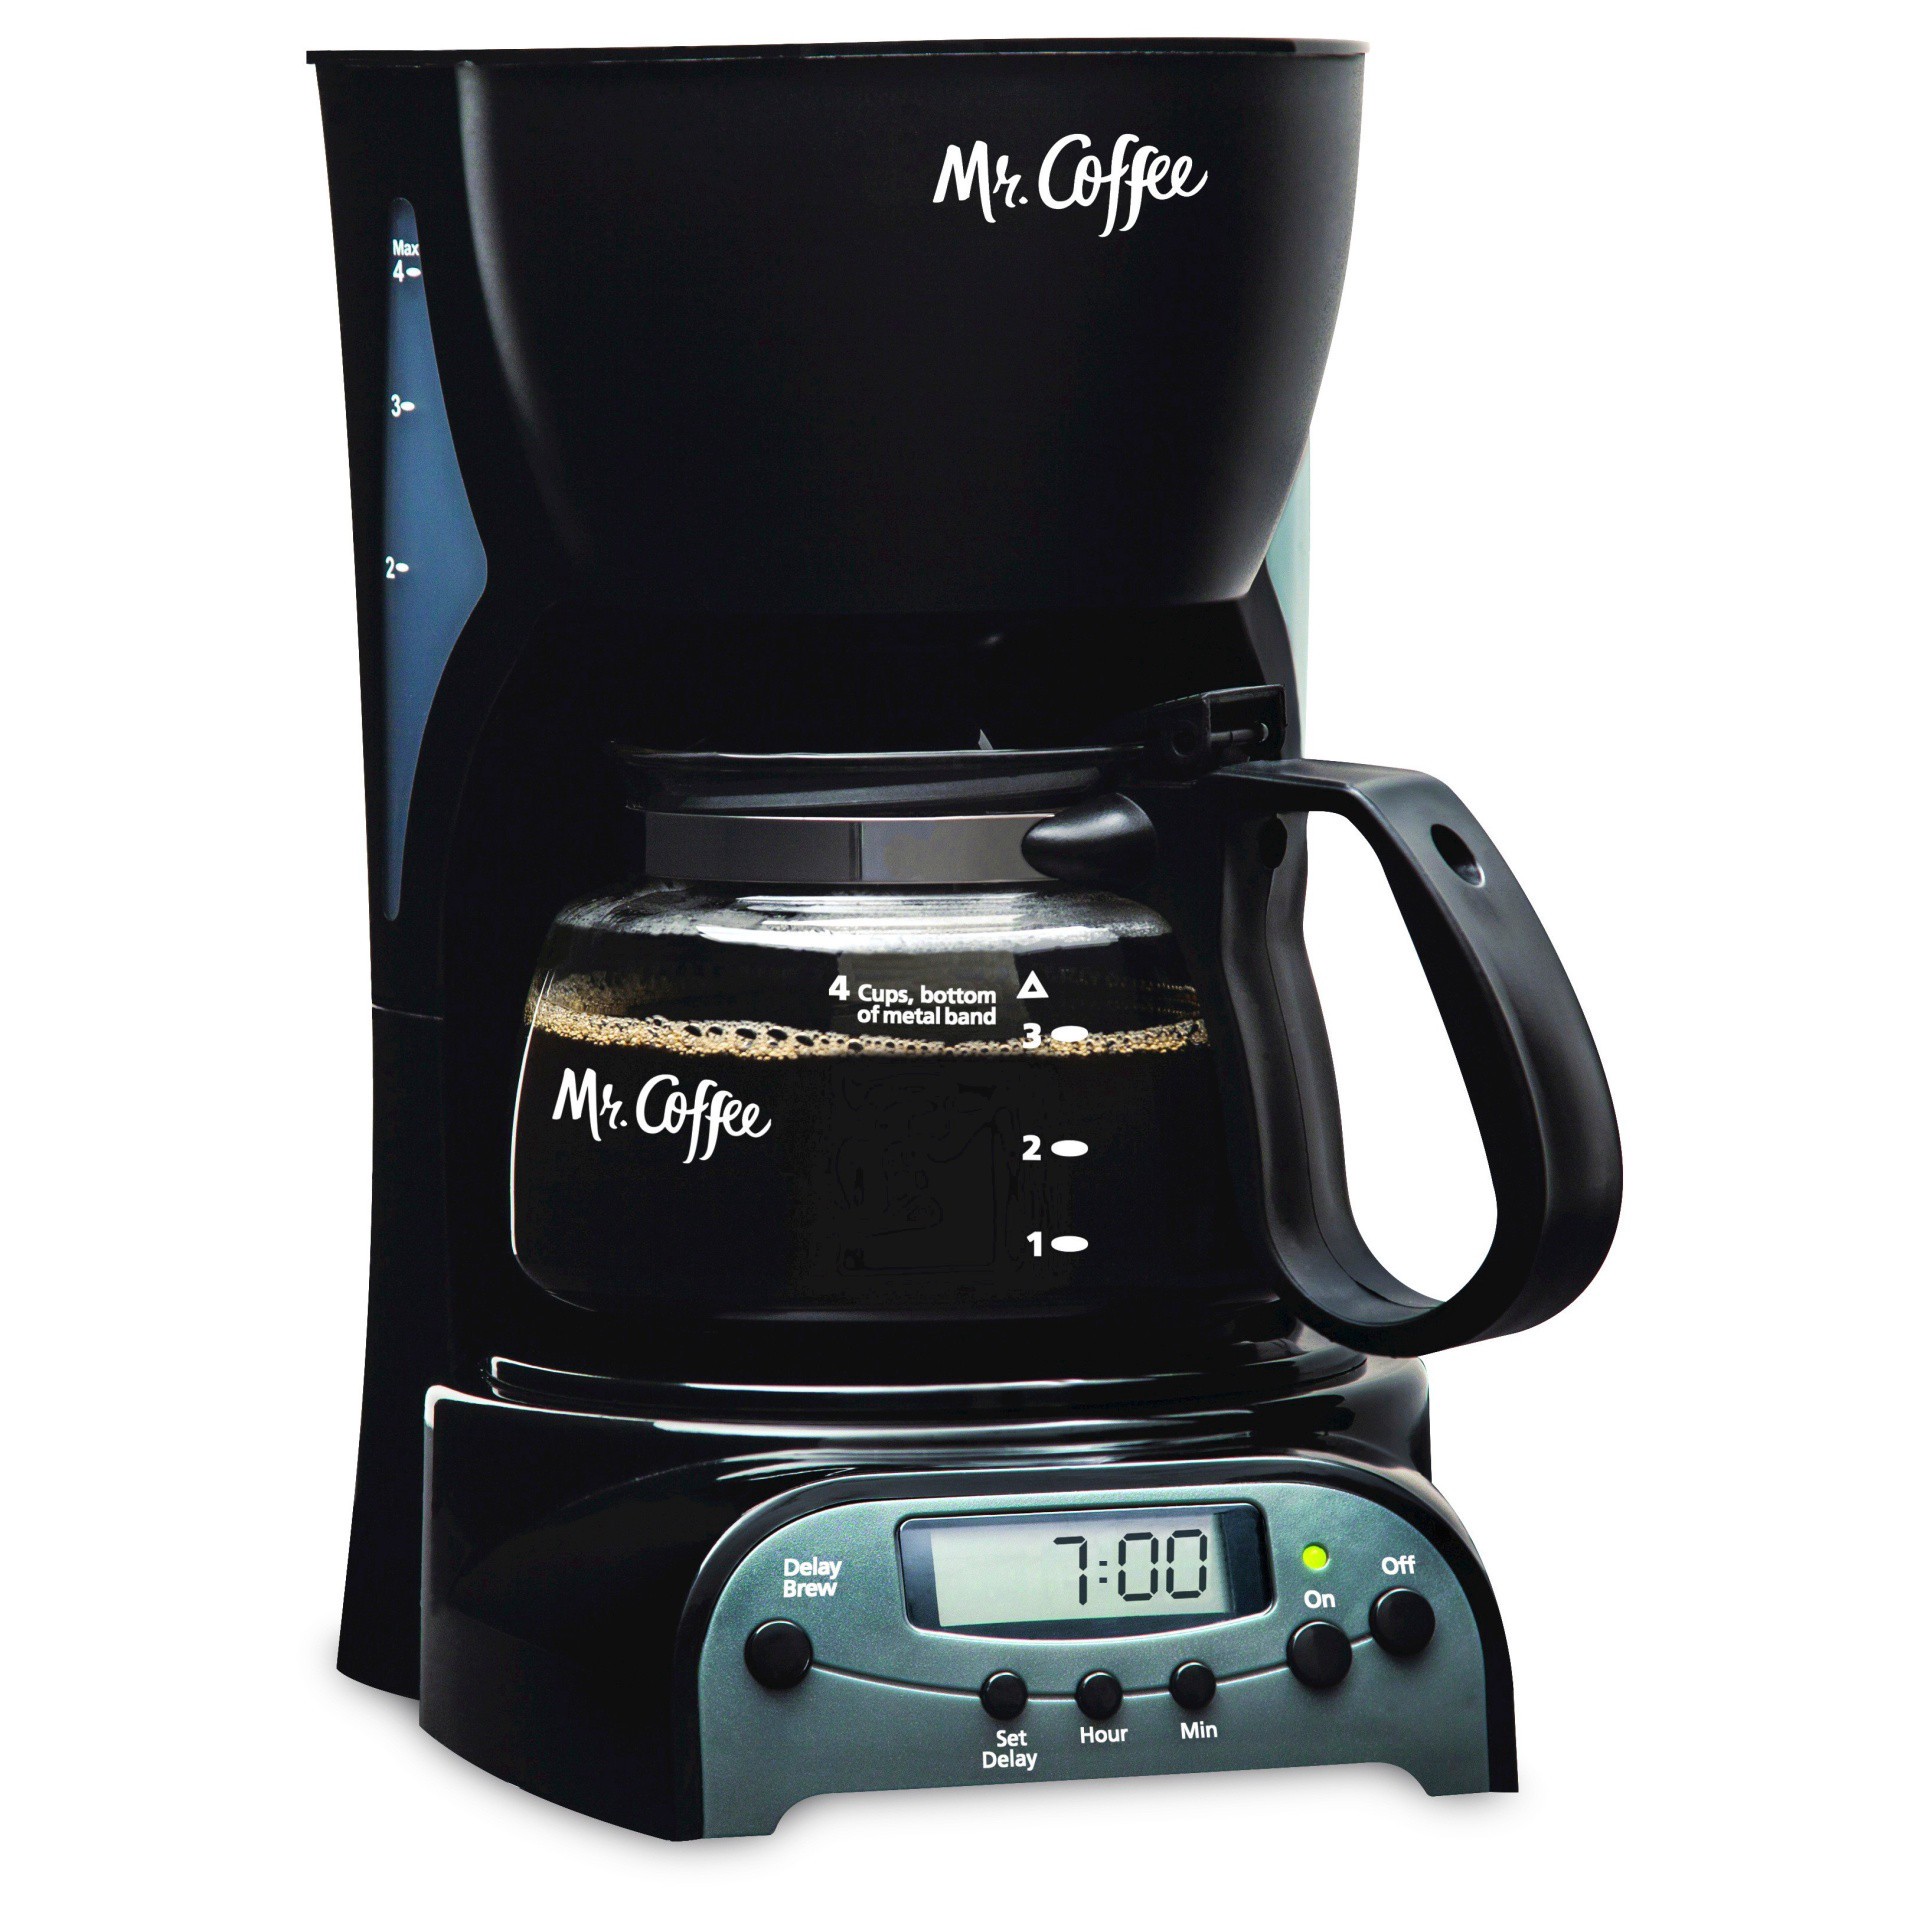  Mr. Coffee Programmable Drip Coffeemaker, 5-Cup, Black: Home &  Kitchen